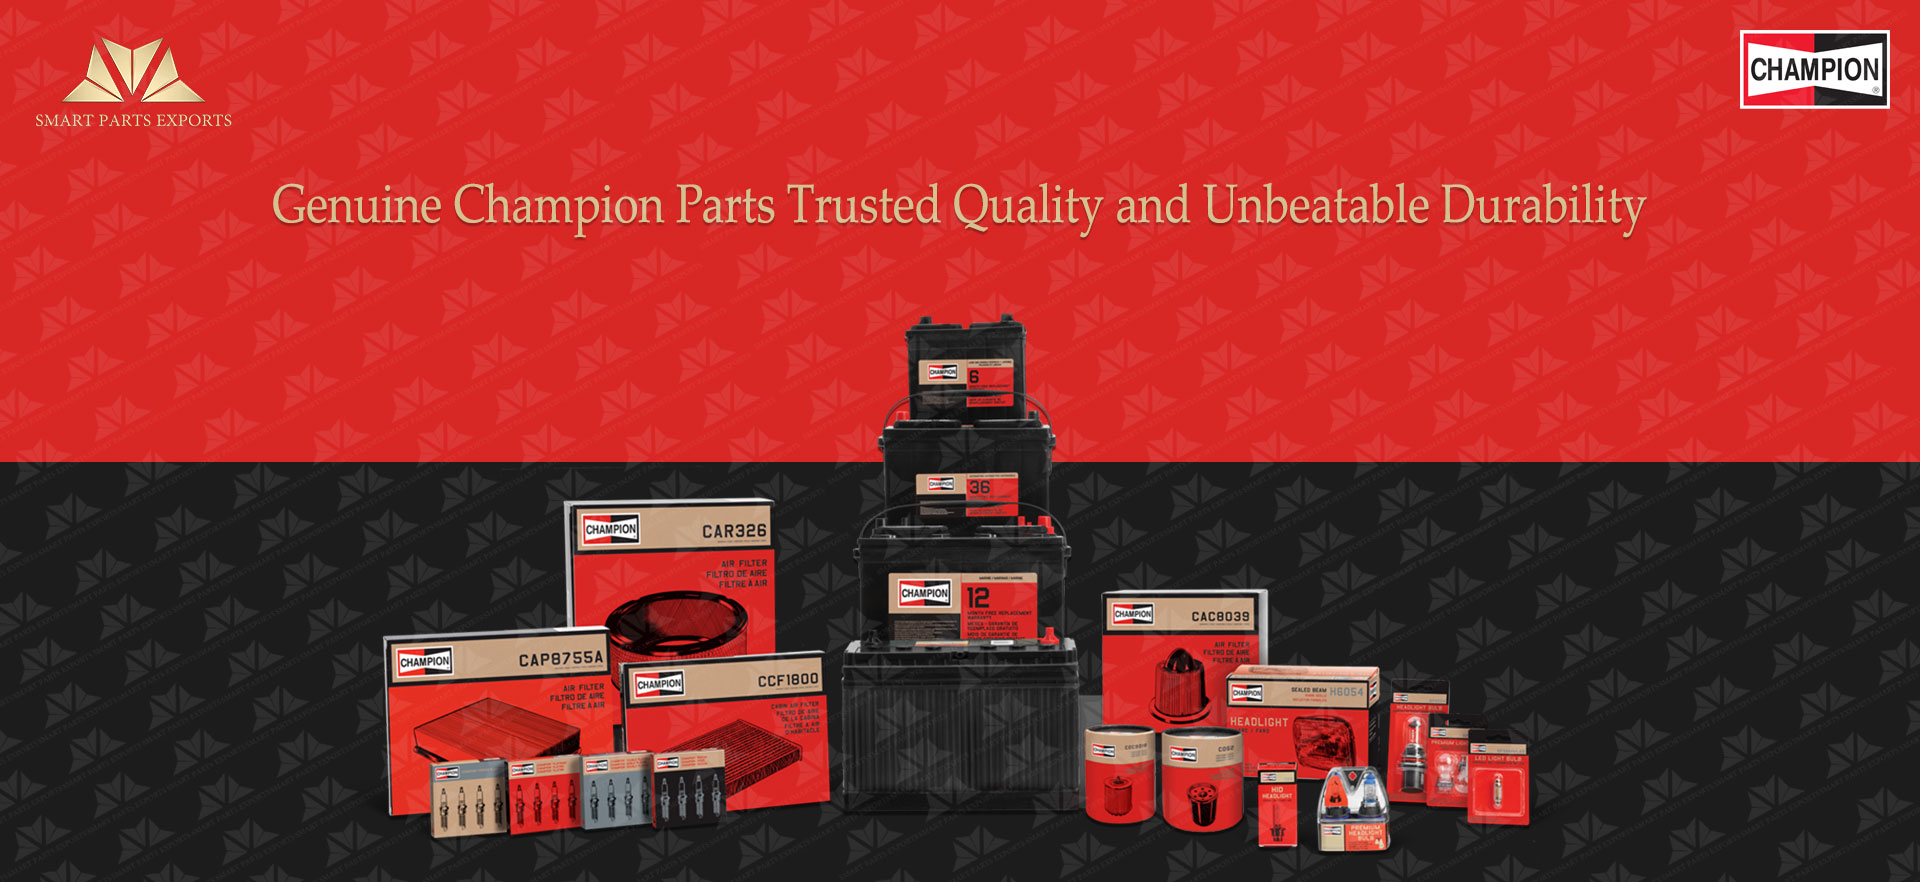 Genuine Champion Parts: Trusted Quality and Unbeatable Durability